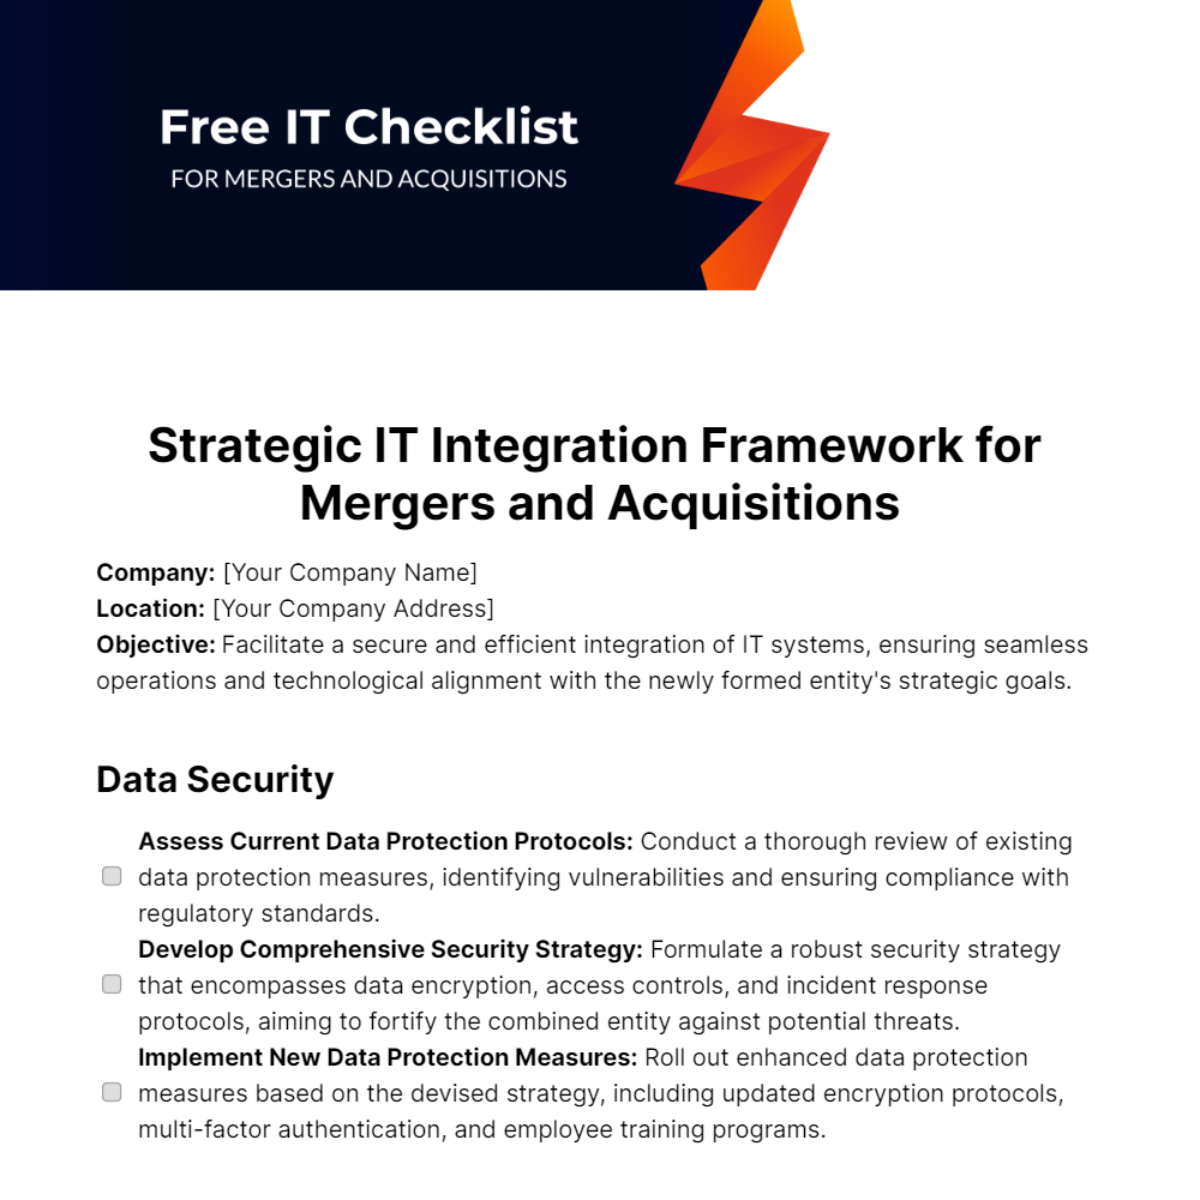 Free IT Checklist for Mergers and Acquisitions Template